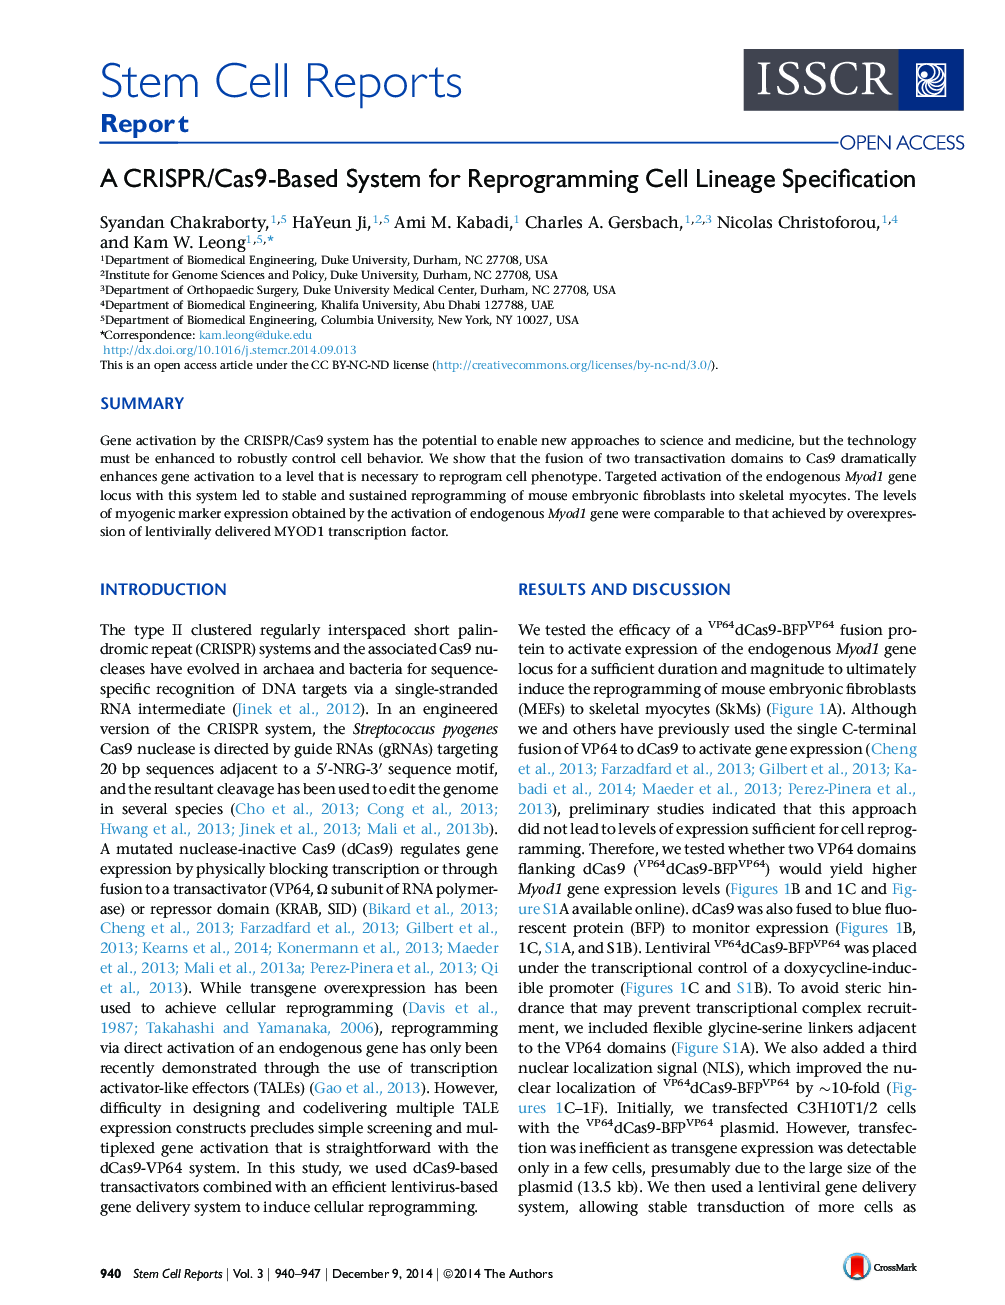 A CRISPR/Cas9-Based System for Reprogramming Cell Lineage Specification 